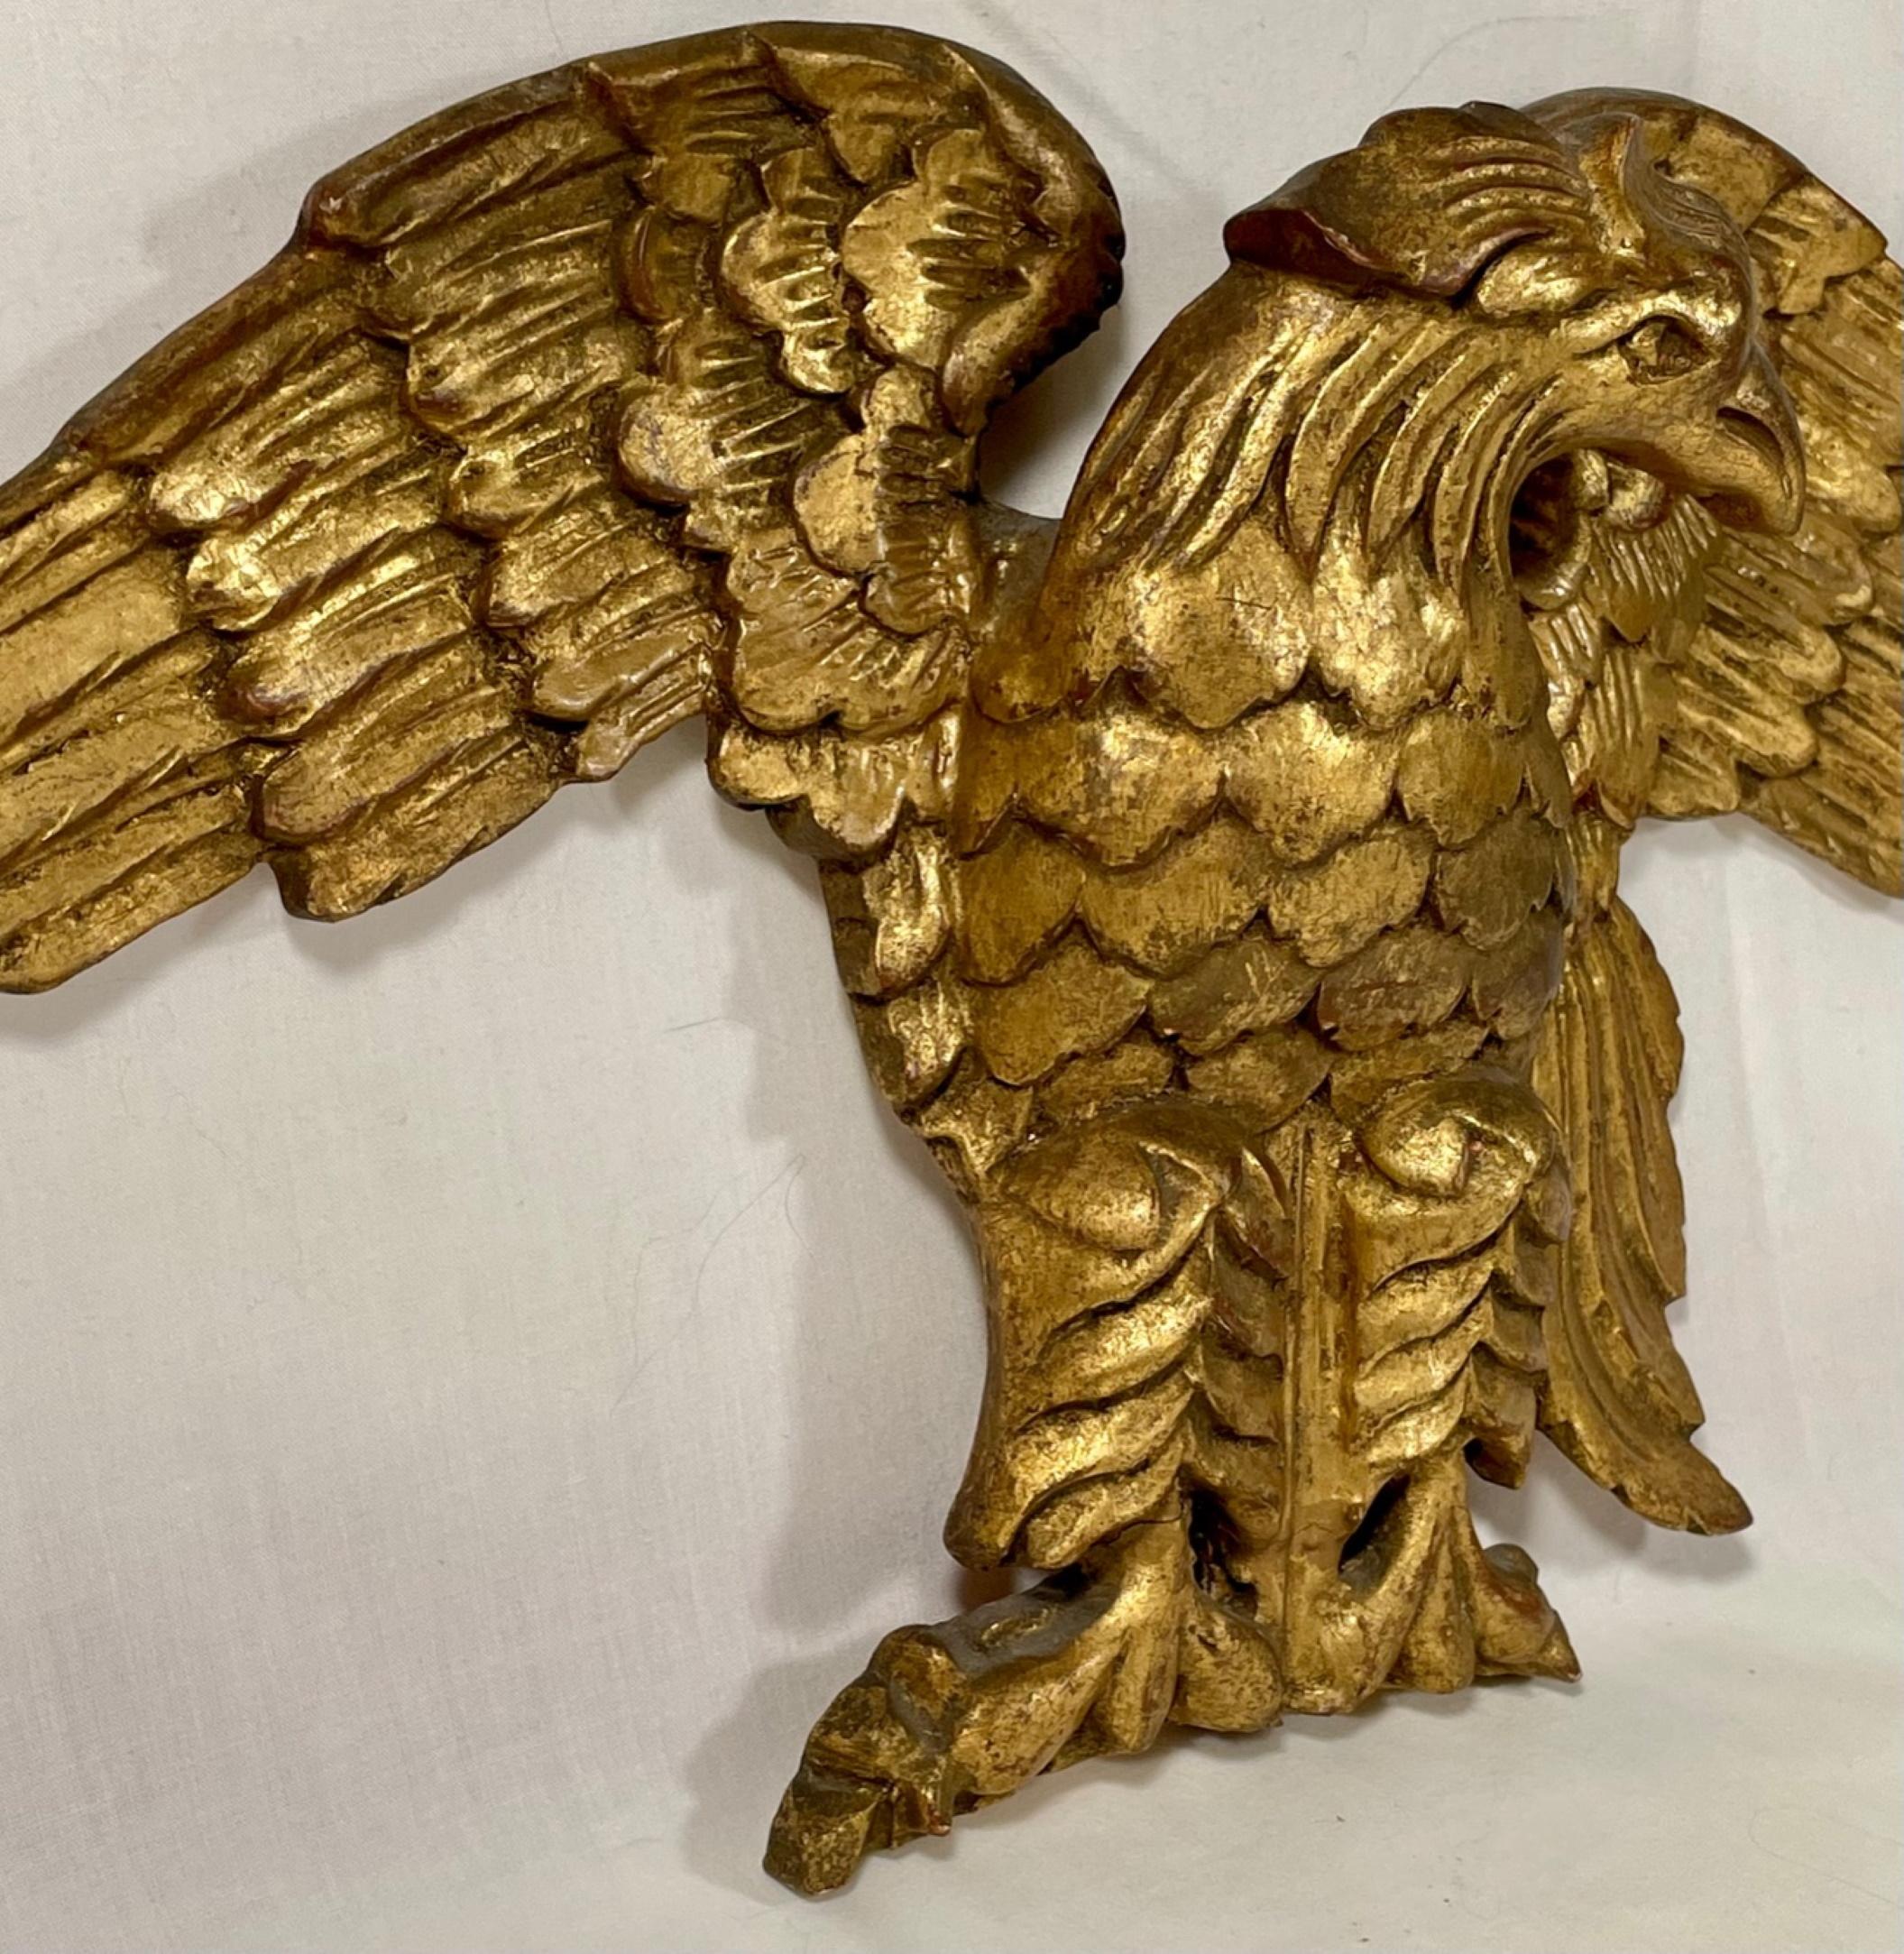 19th century American hand carved gilded pediment eagle.

Antique decorative hand carved and gilded wooden pediment eagle. The expressive sculpture with head turned to the left and wings spread is executed in a masterful fashion. This circa 1850